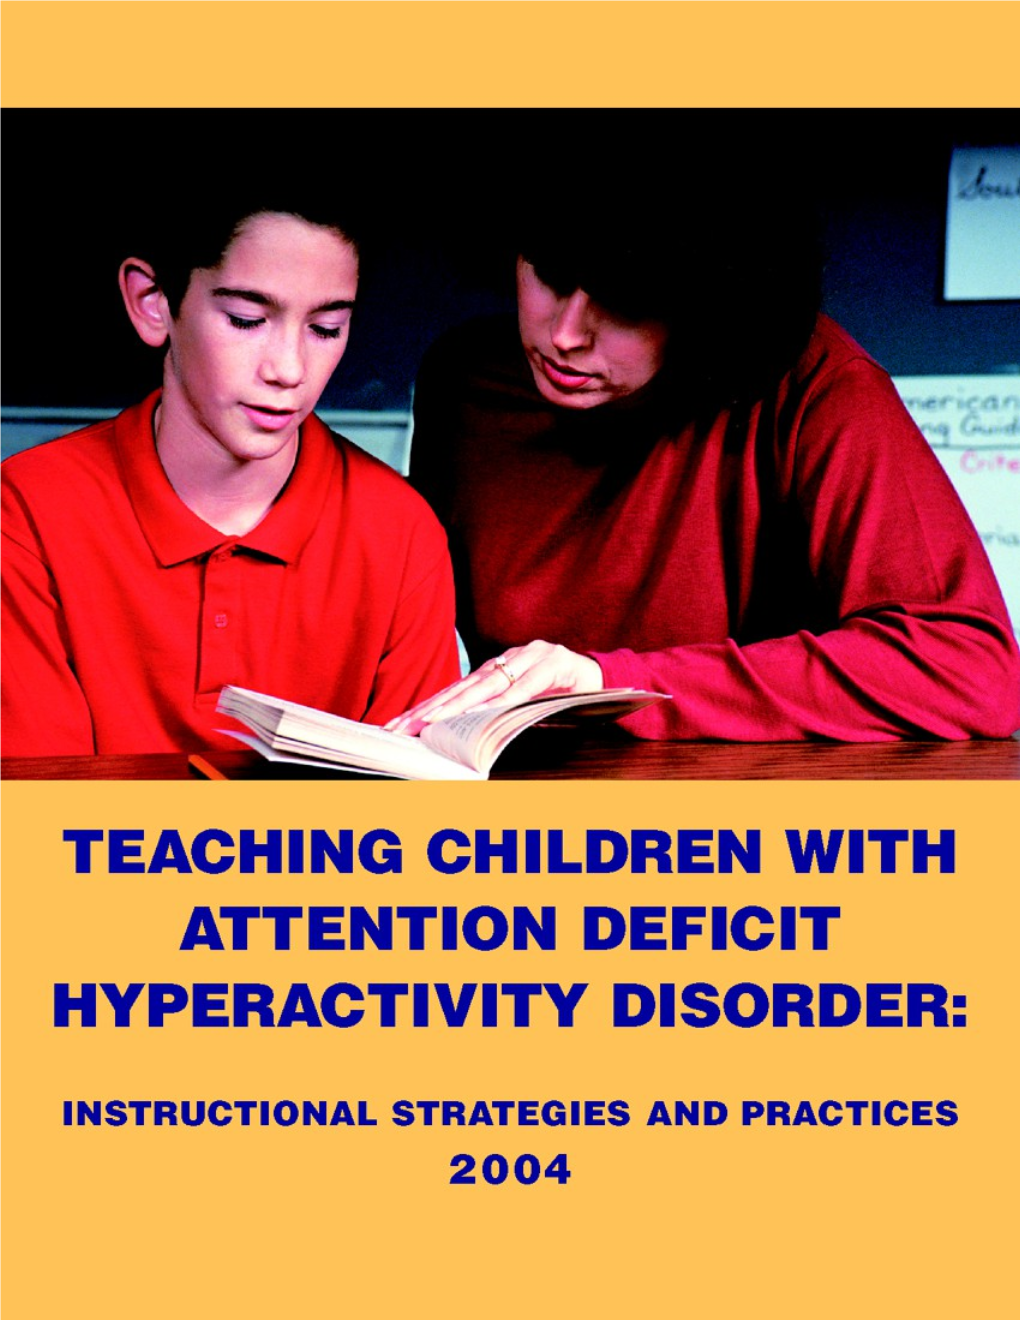 Instructional Strategies and Practices